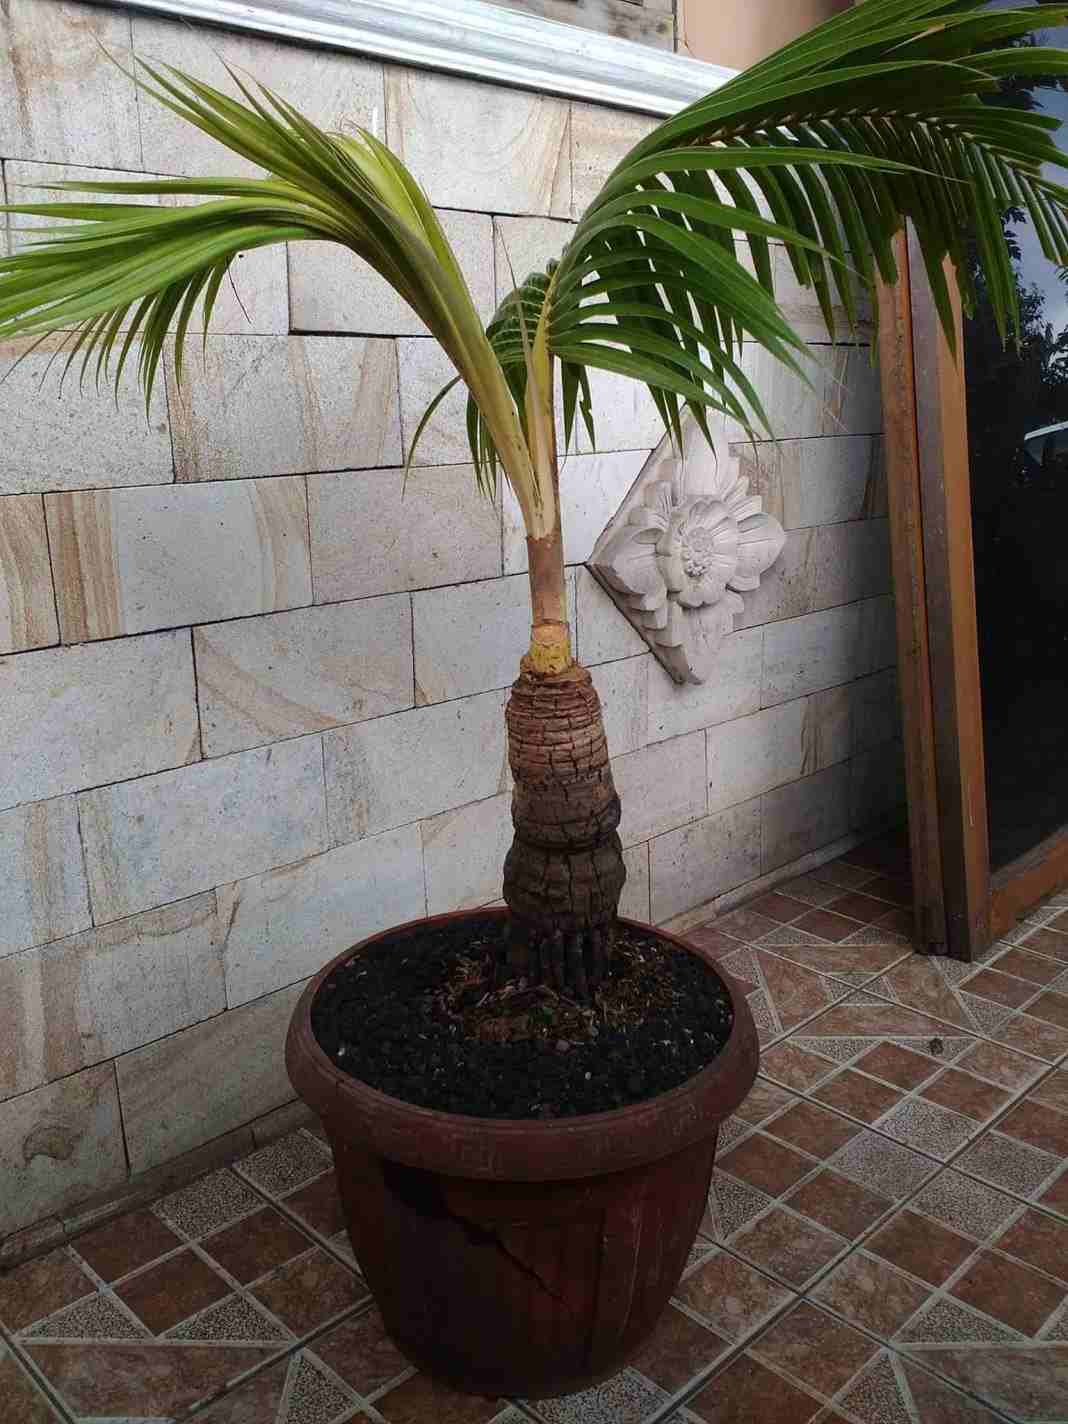 Palm trees create an exotic feel in the home and garden